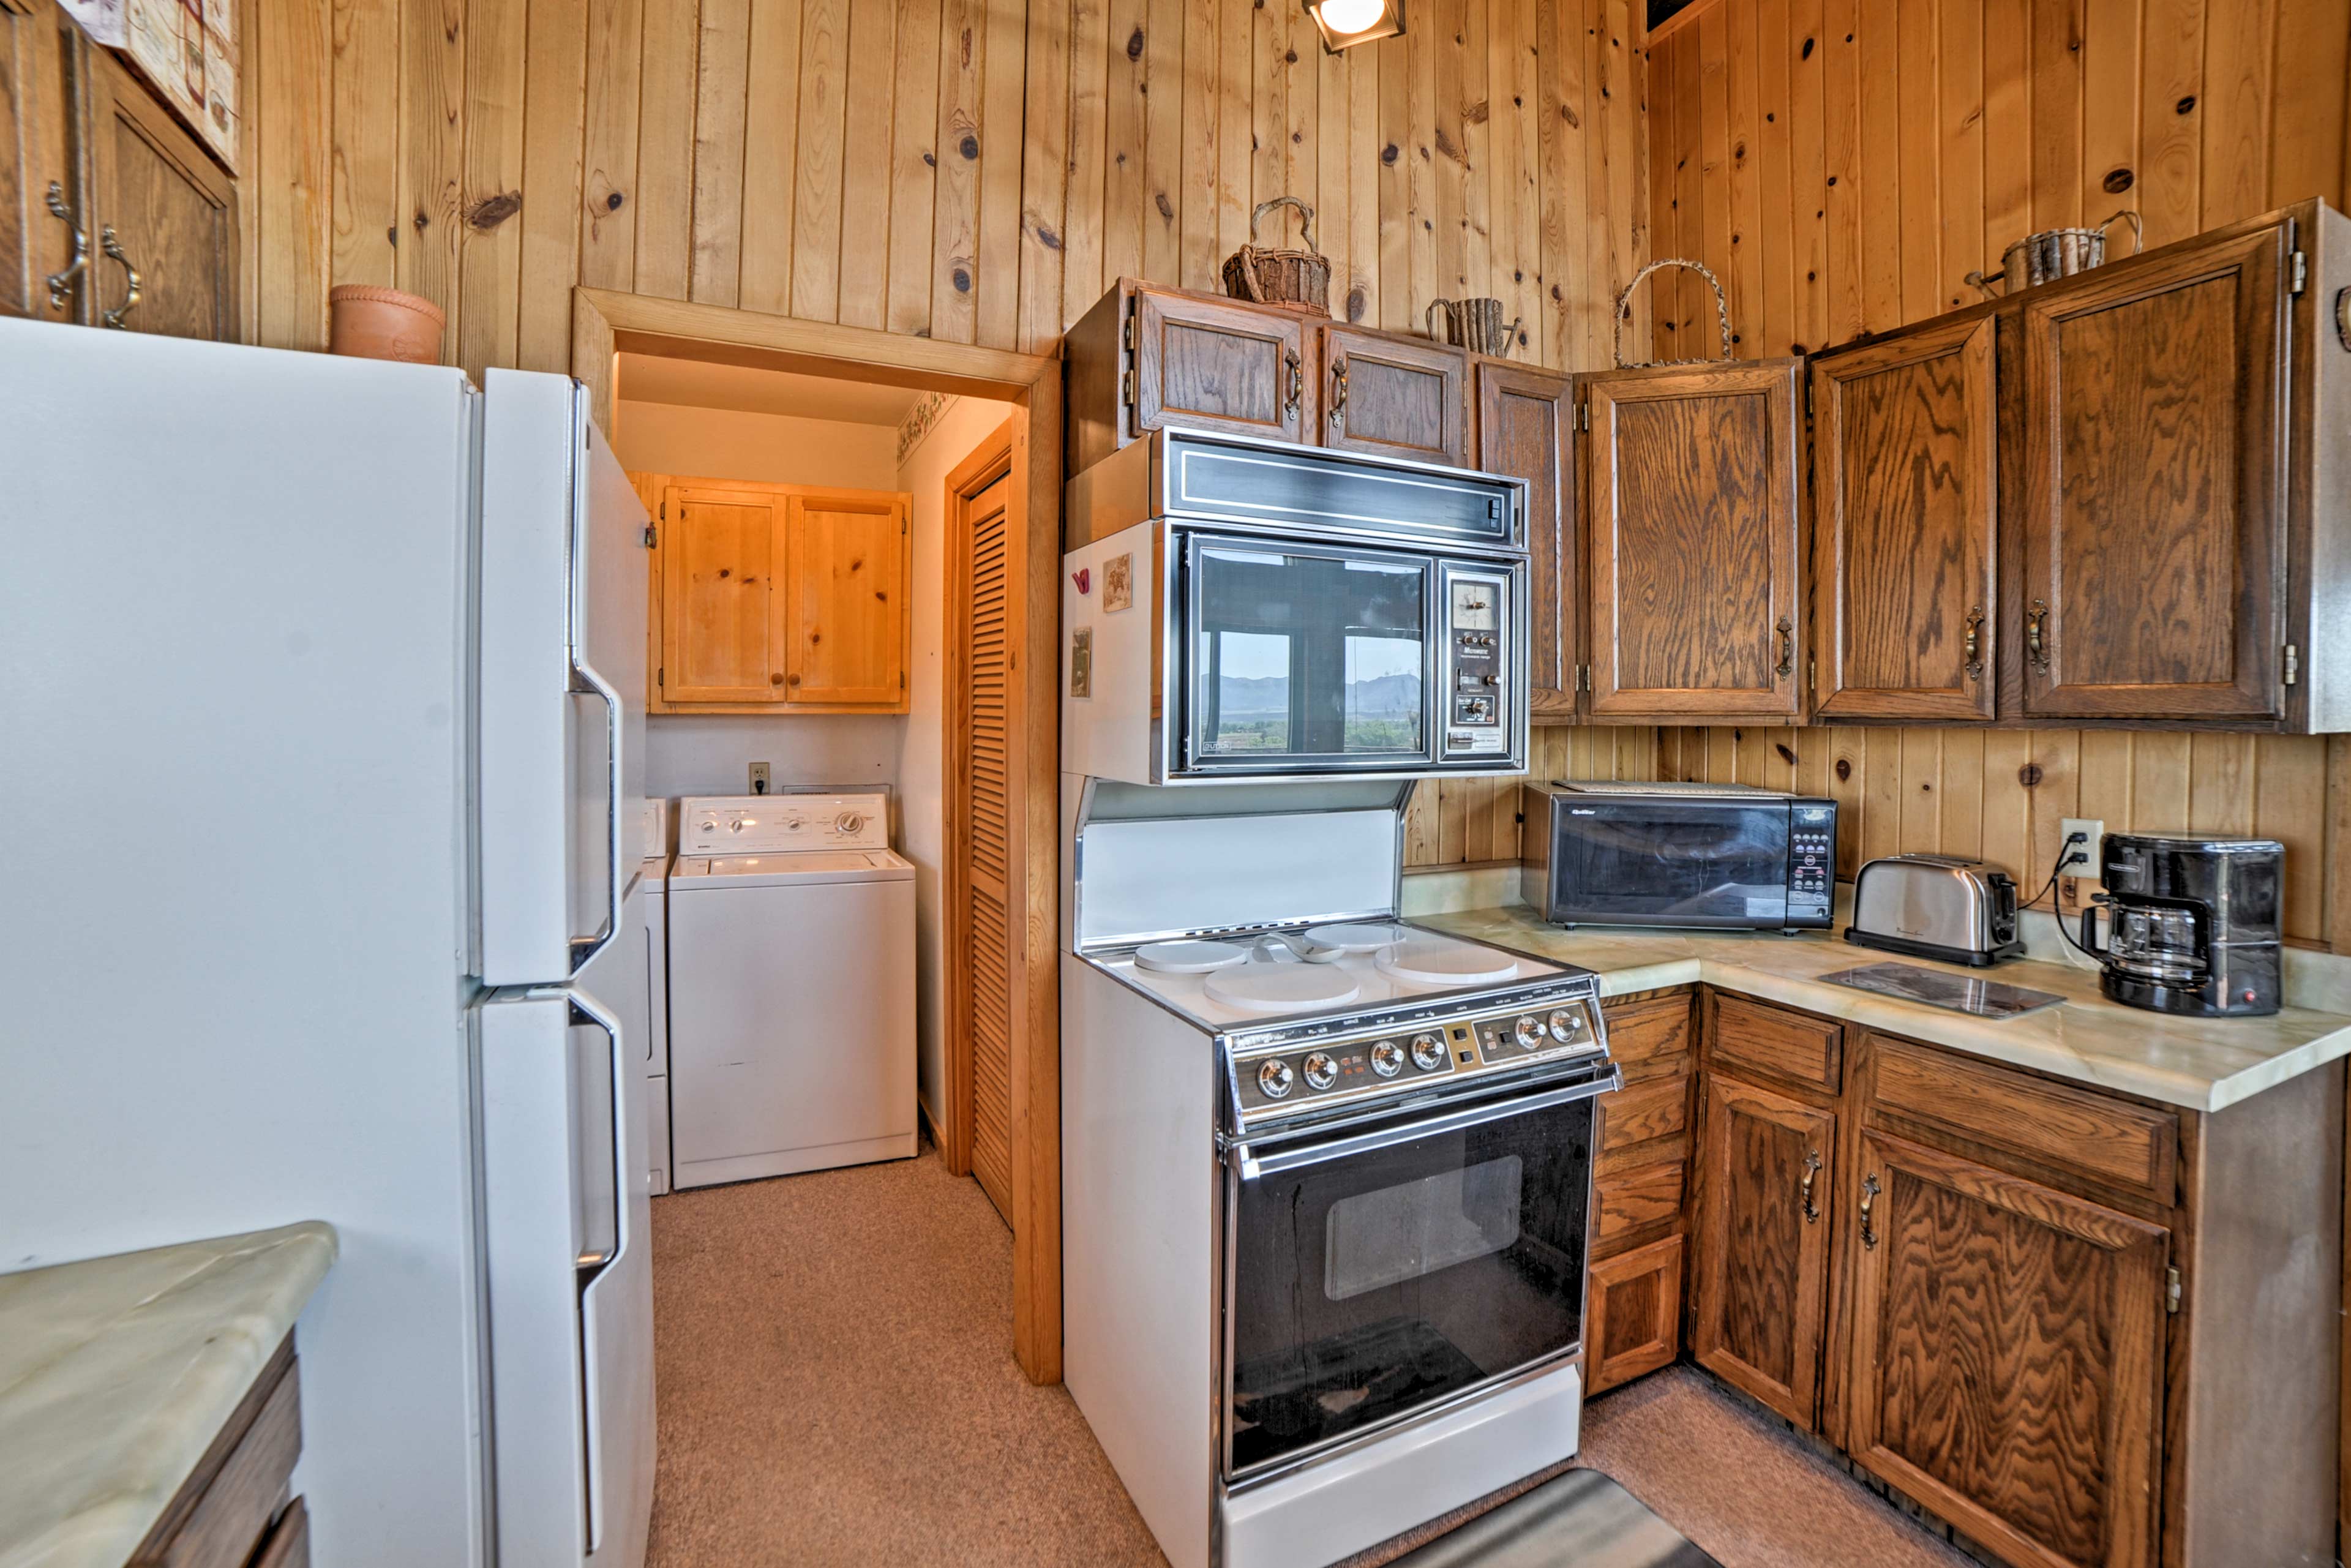 The kitchen is fully equipped with modern appliances.